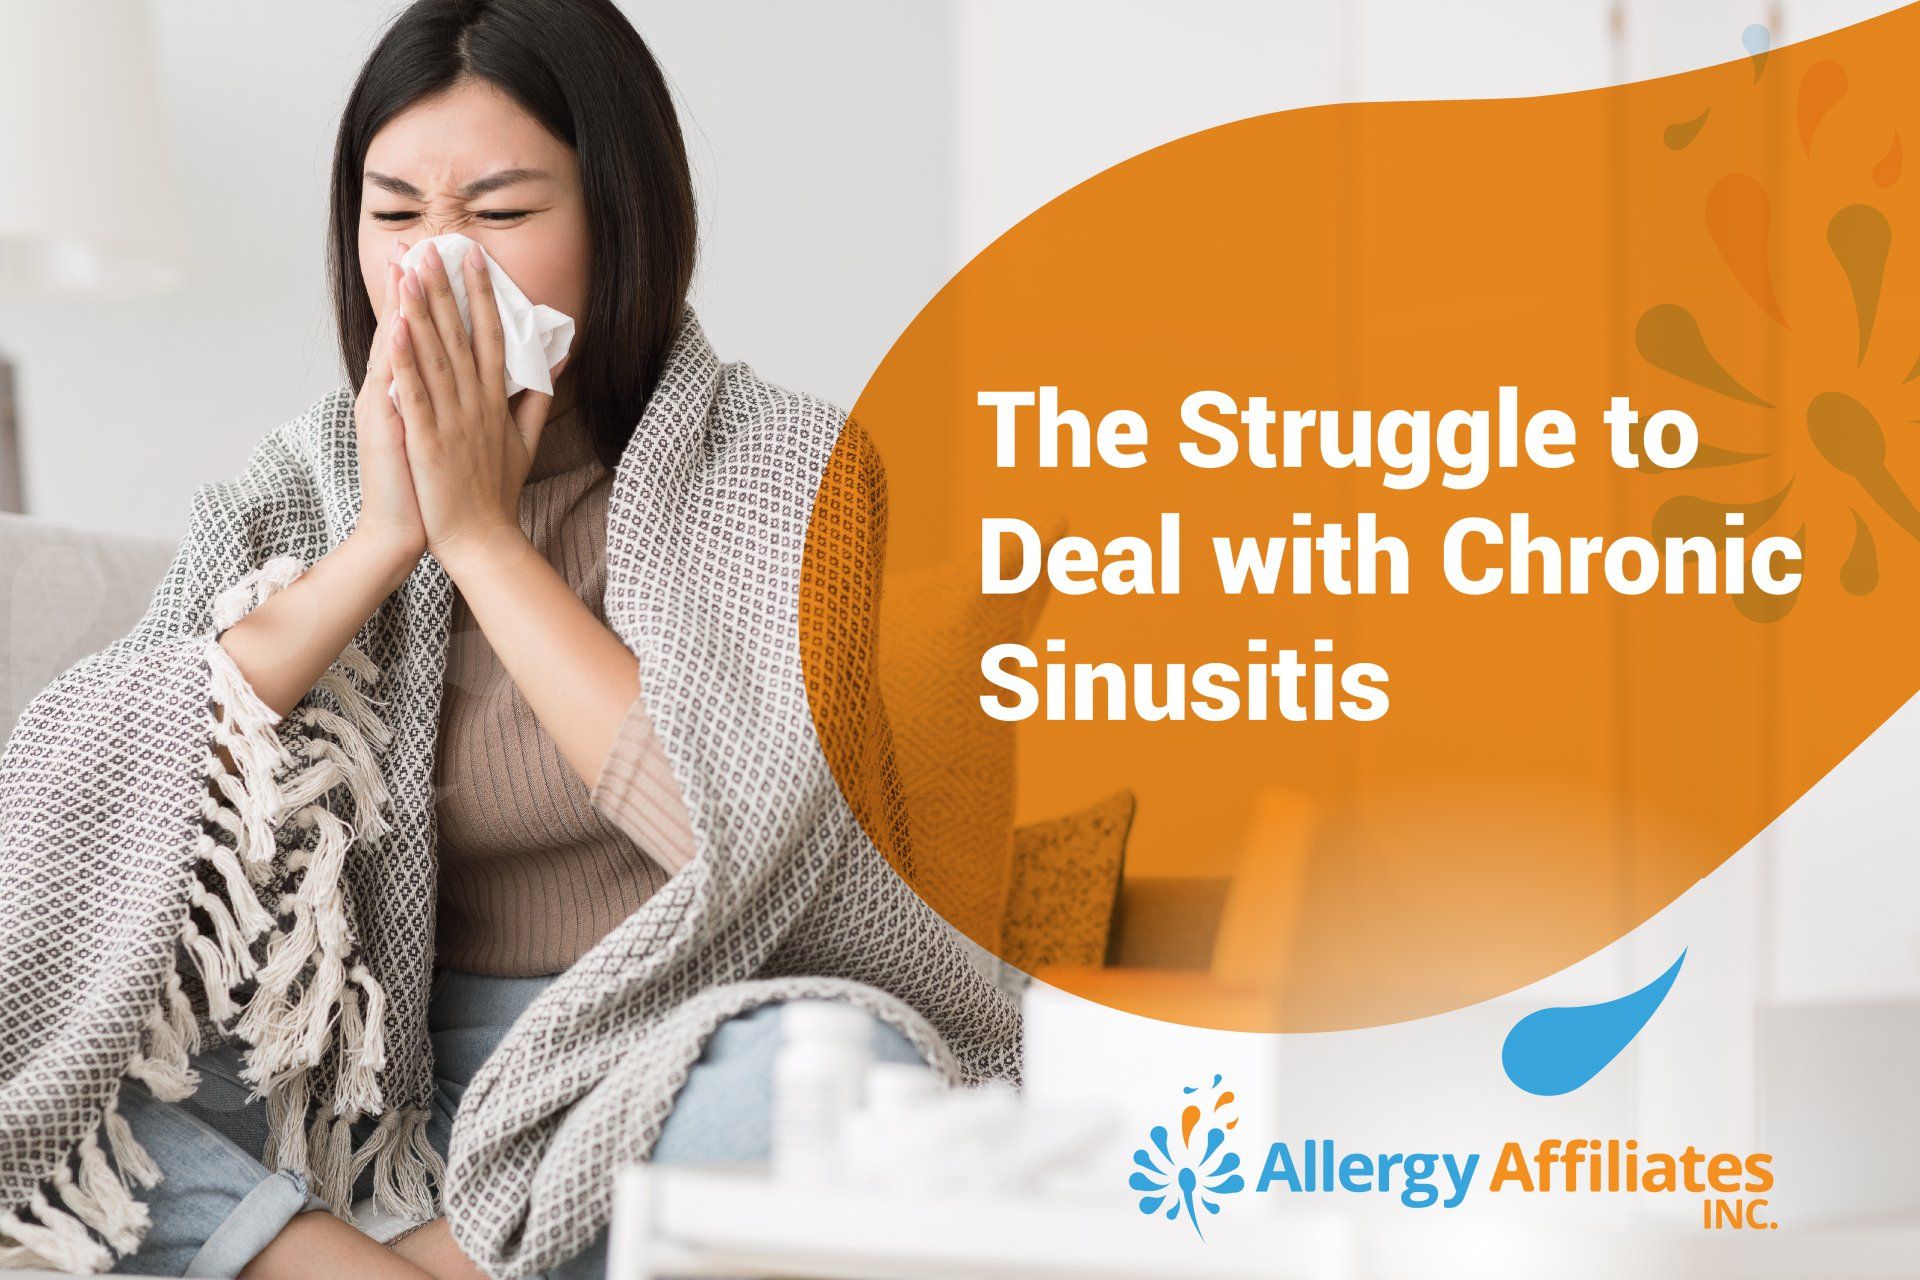 The Struggle to Deal with Chronic Sinusitis